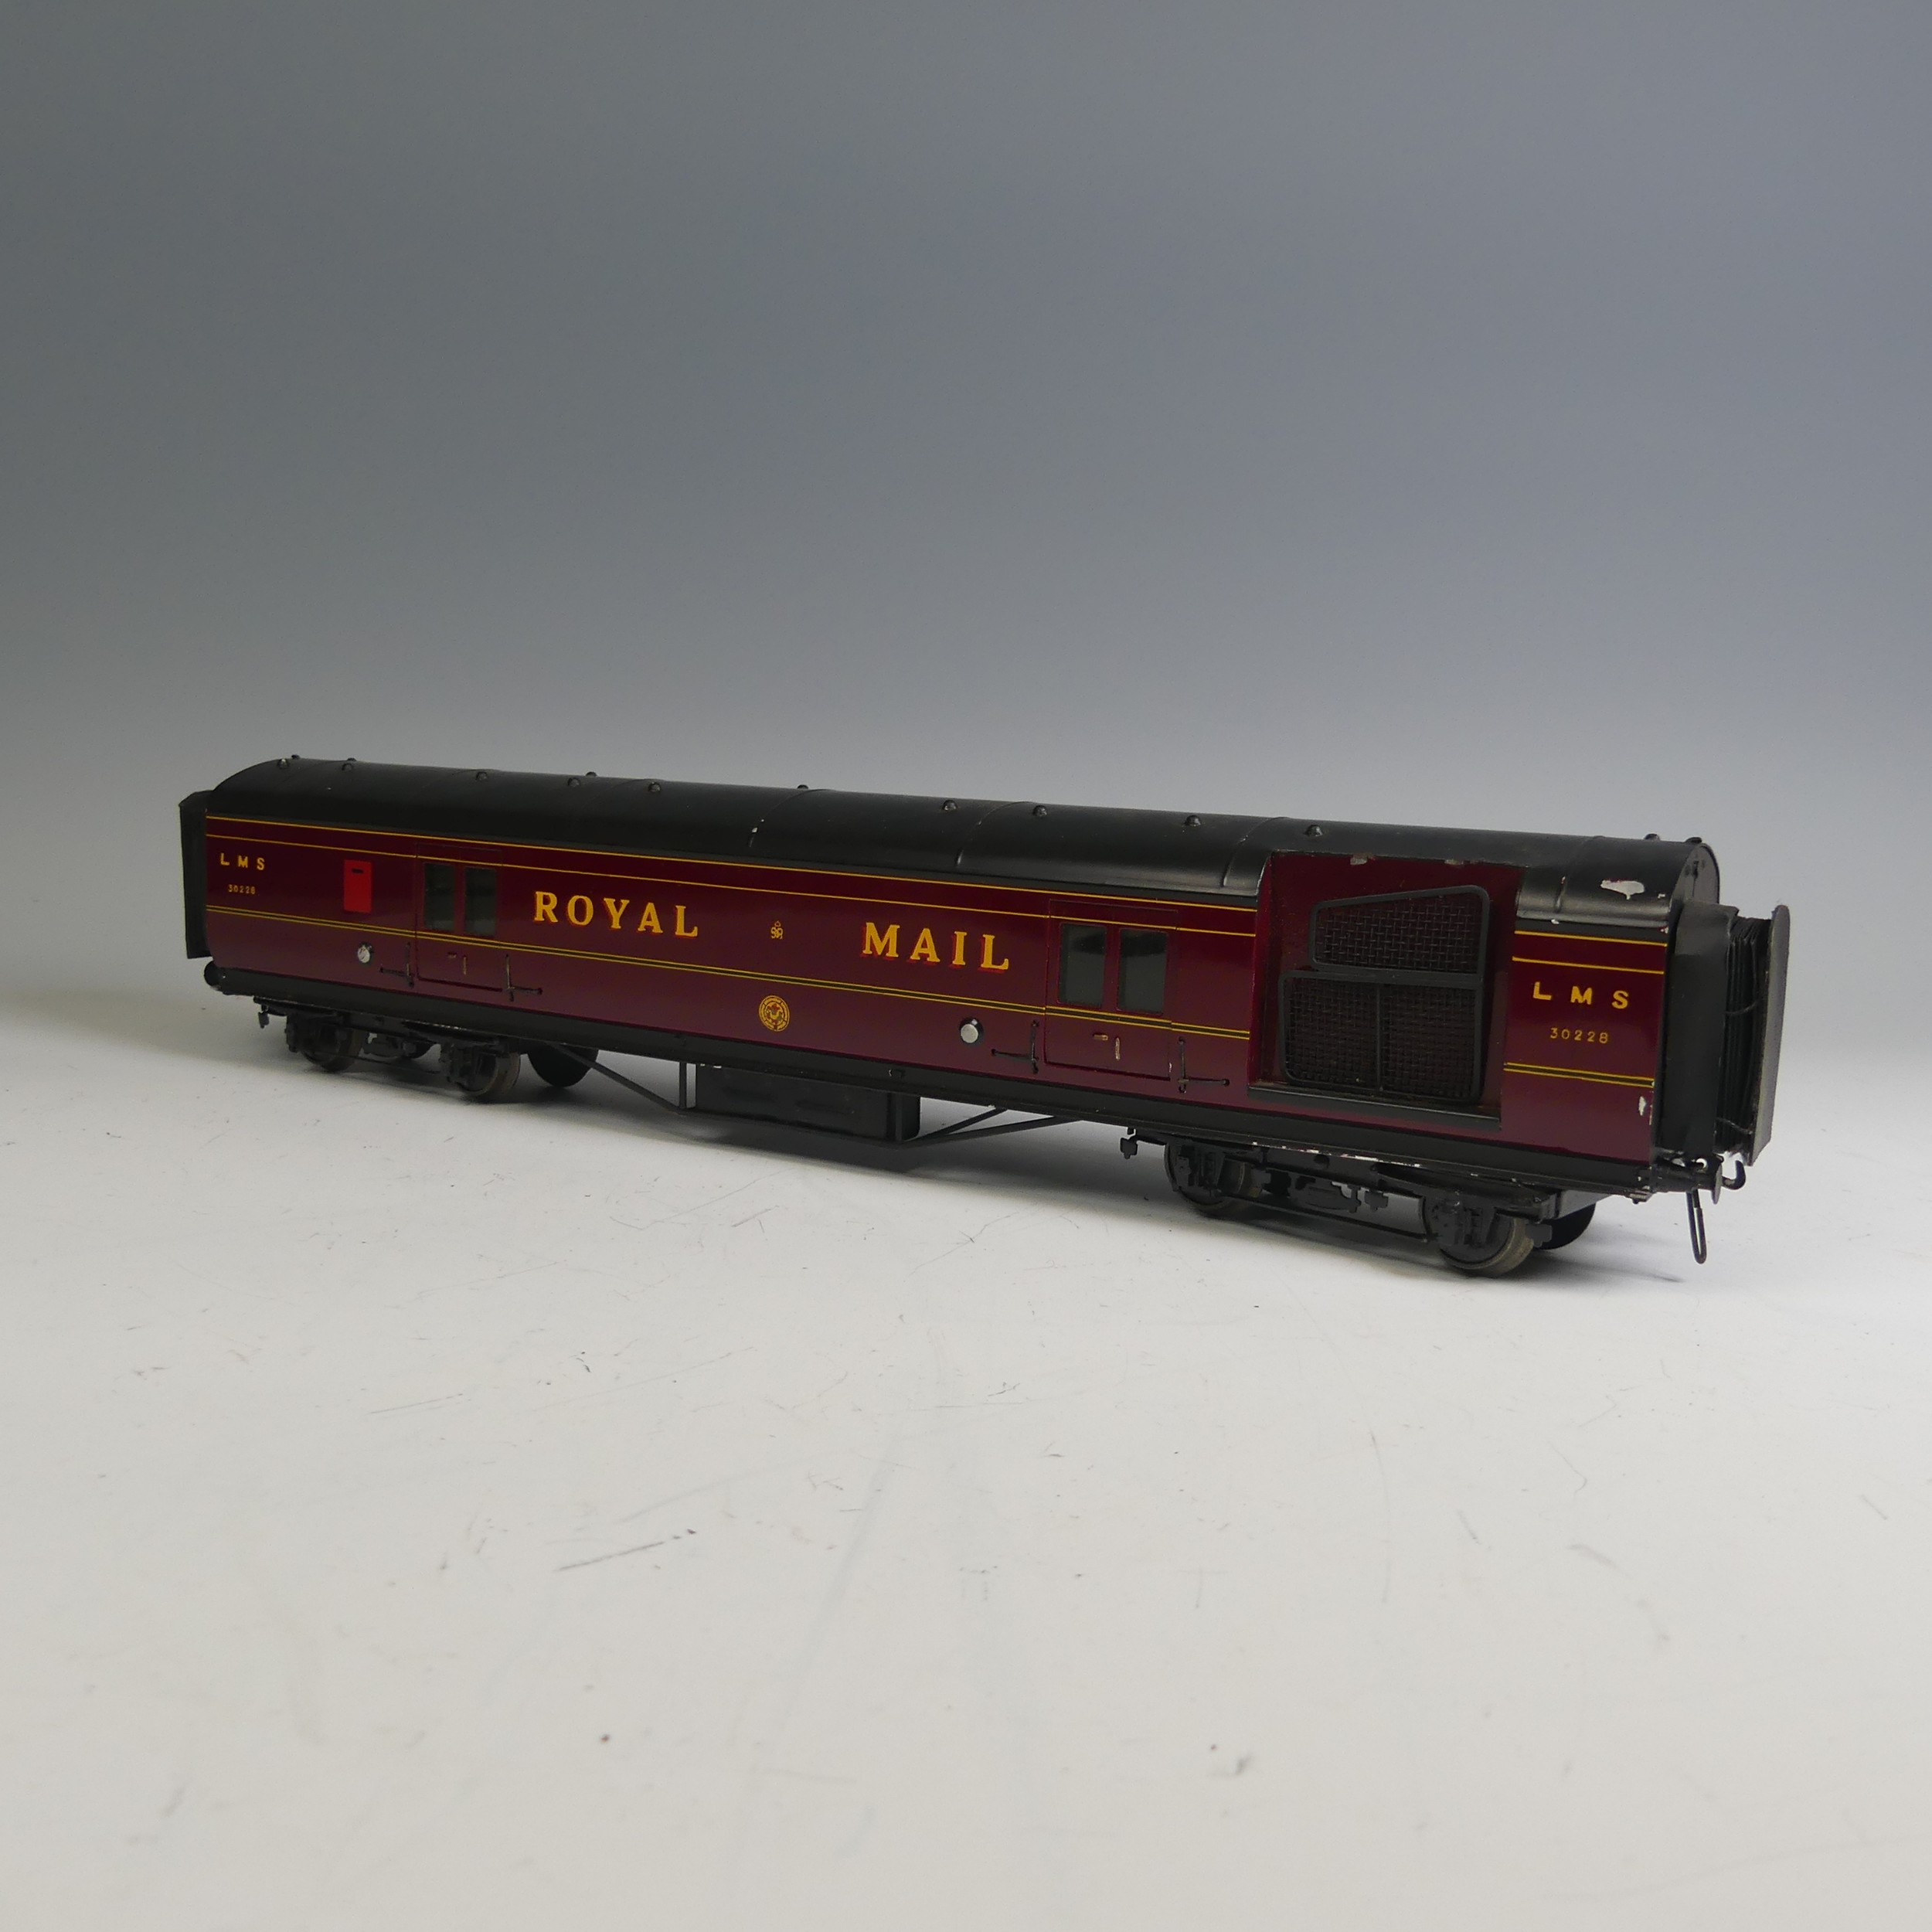 Exley ‘0’ gauge LMS Royal Mail Coach, in LMS maroon with yellow lettering, No. 30228.